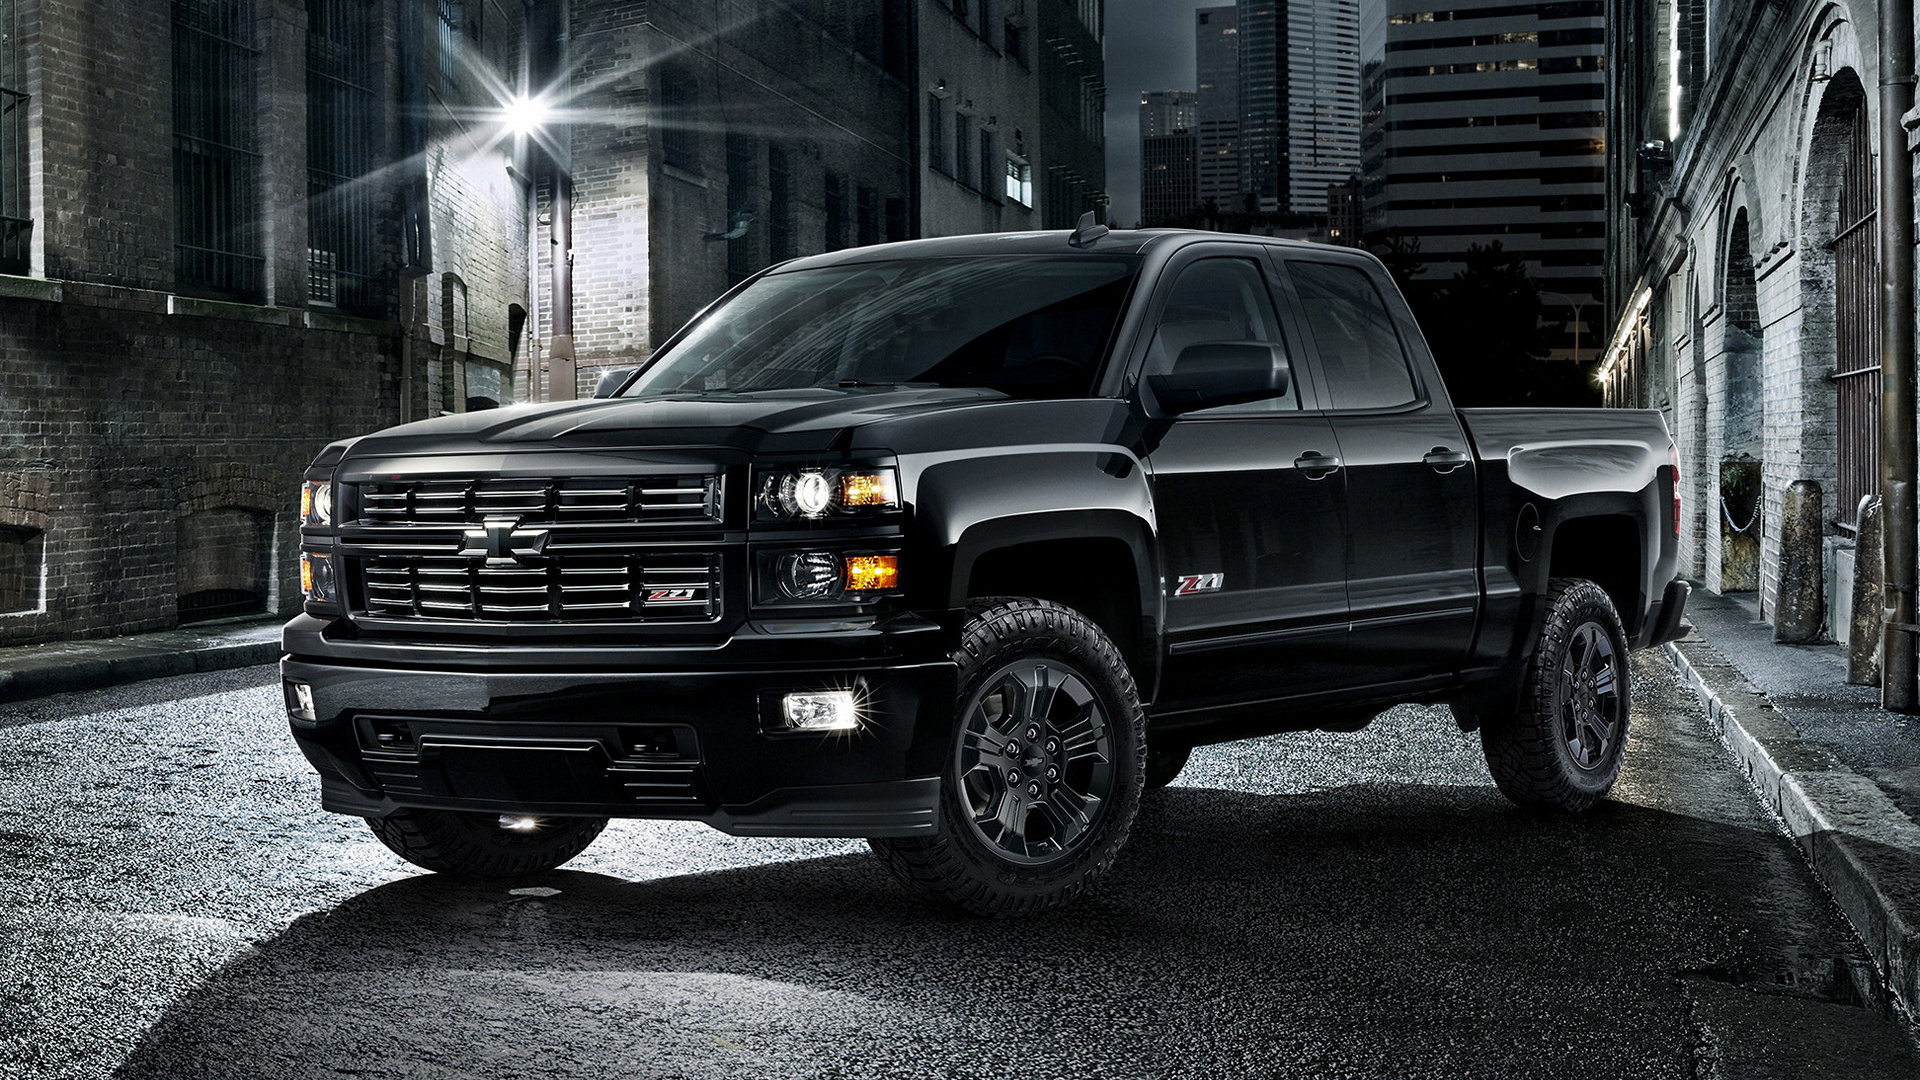 Chevrolet Silverado LT Z71 Midnight Double Cab 2015 Wallpapers and 1920x1080